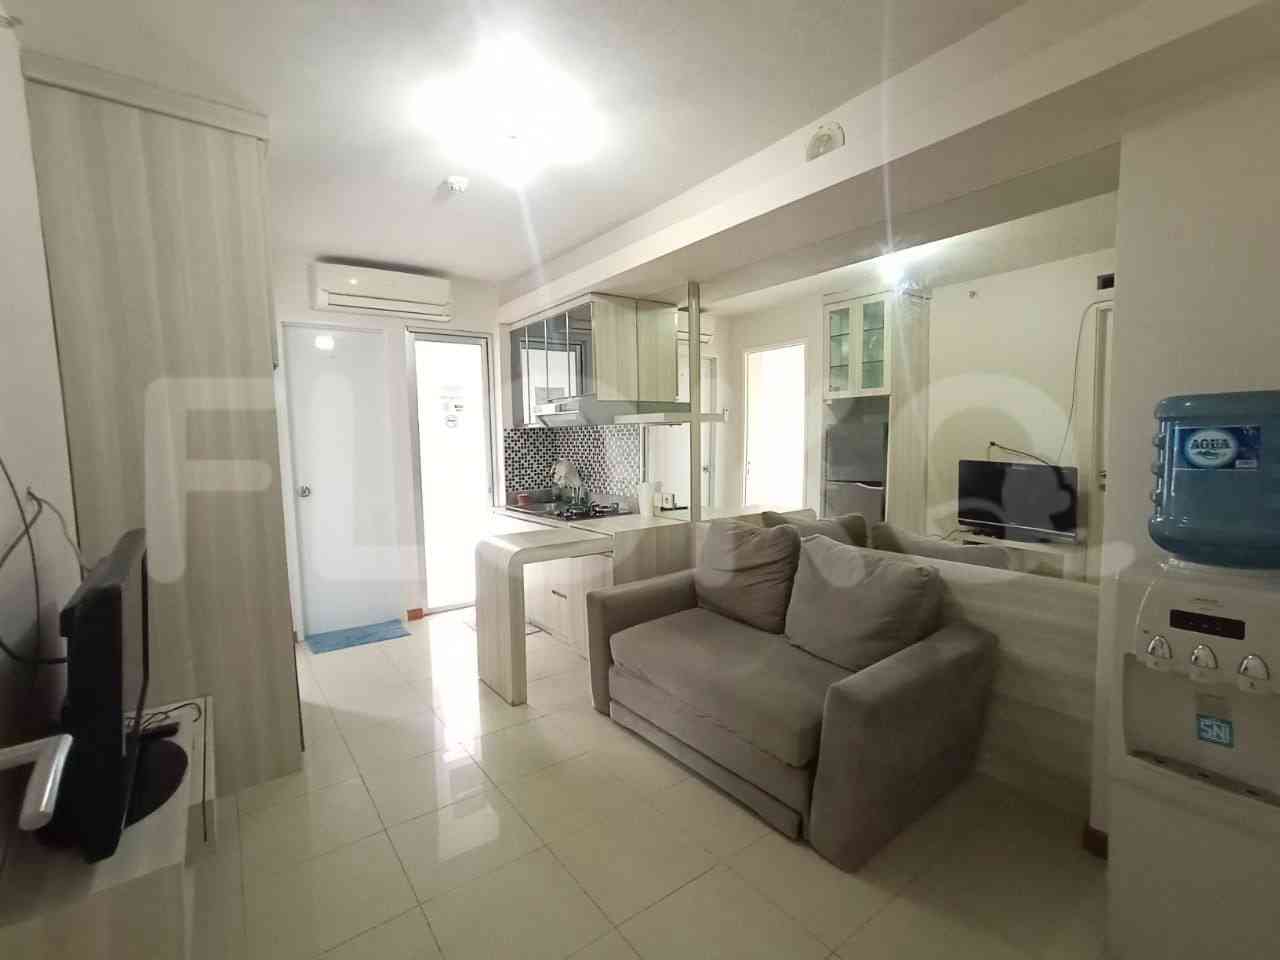 2 Bedroom on 17th Floor for Rent in Bassura City Apartment - fcibe1 1